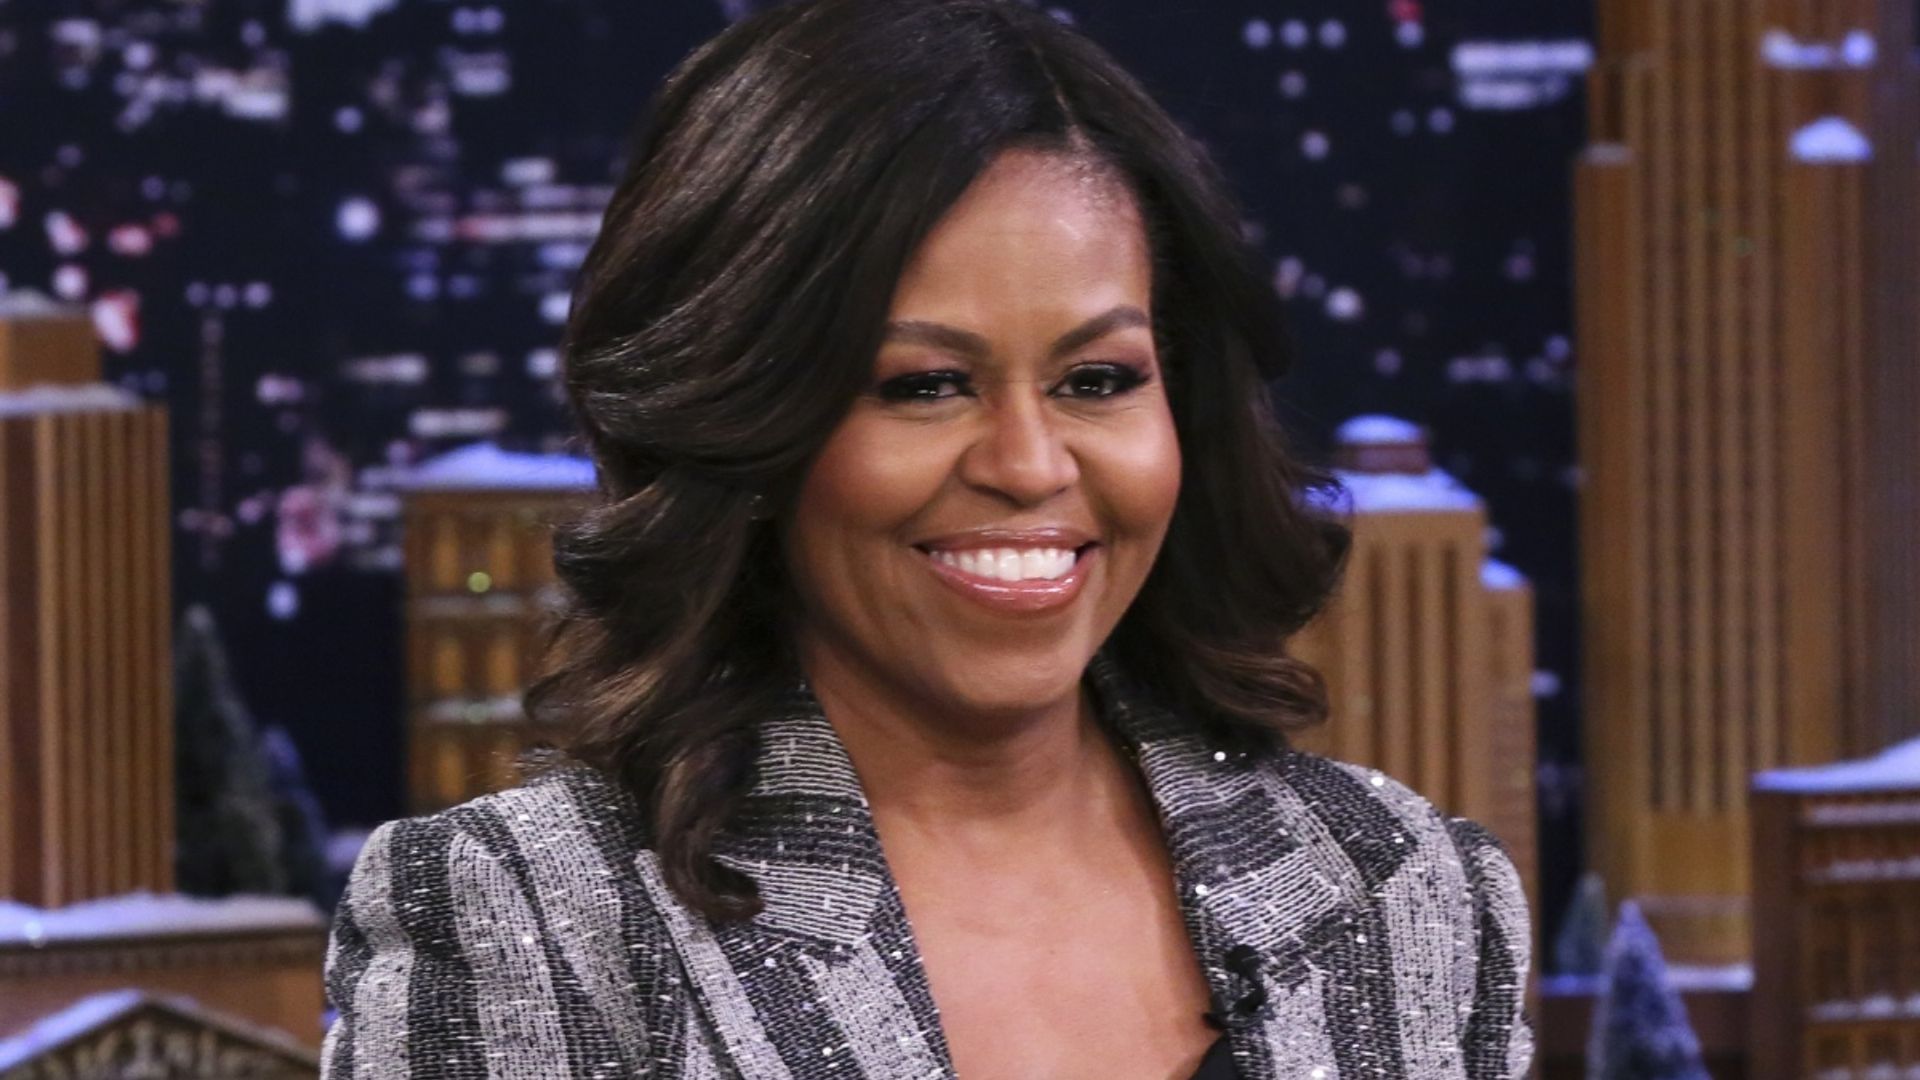 Michelle Obama celebrates big birthday with rare and adorable family photo